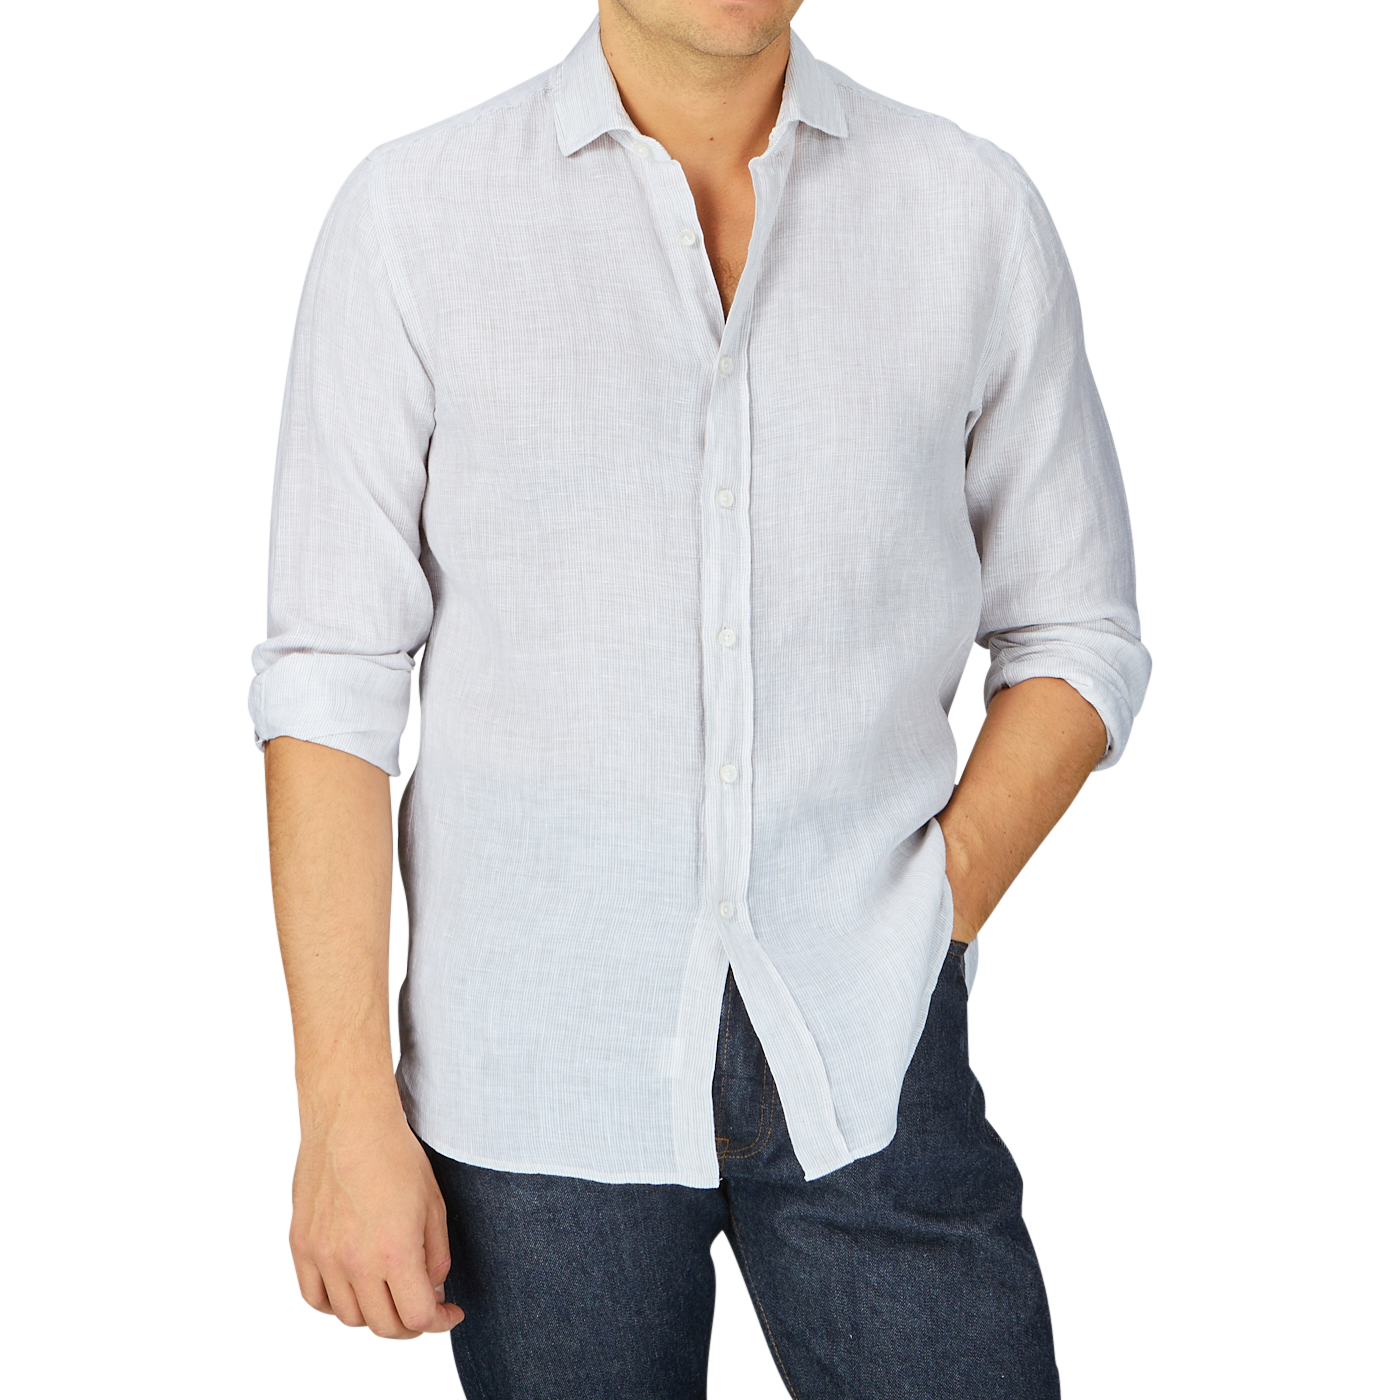 Man wearing a Xacus beige striped washed linen legacy shirt and dark jeans, with the shirt partially untucked.